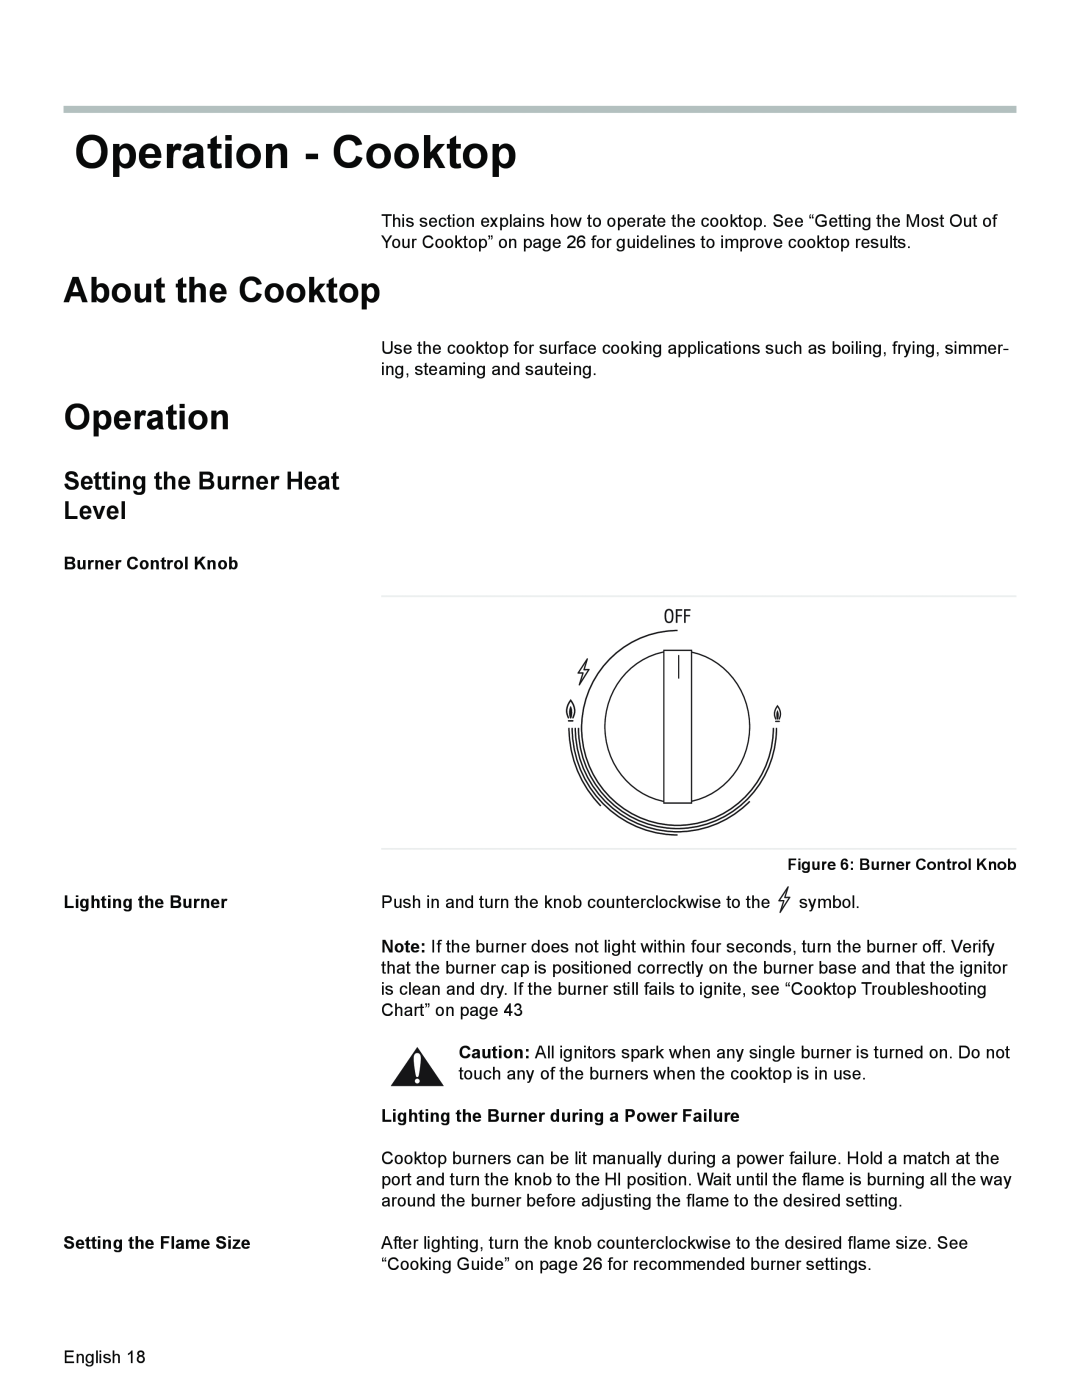 Siemens HG2528UC, HG2425UC manual Operation - Cooktop, About the Cooktop, Setting the Burner Heat Level, Burner Control Knob 